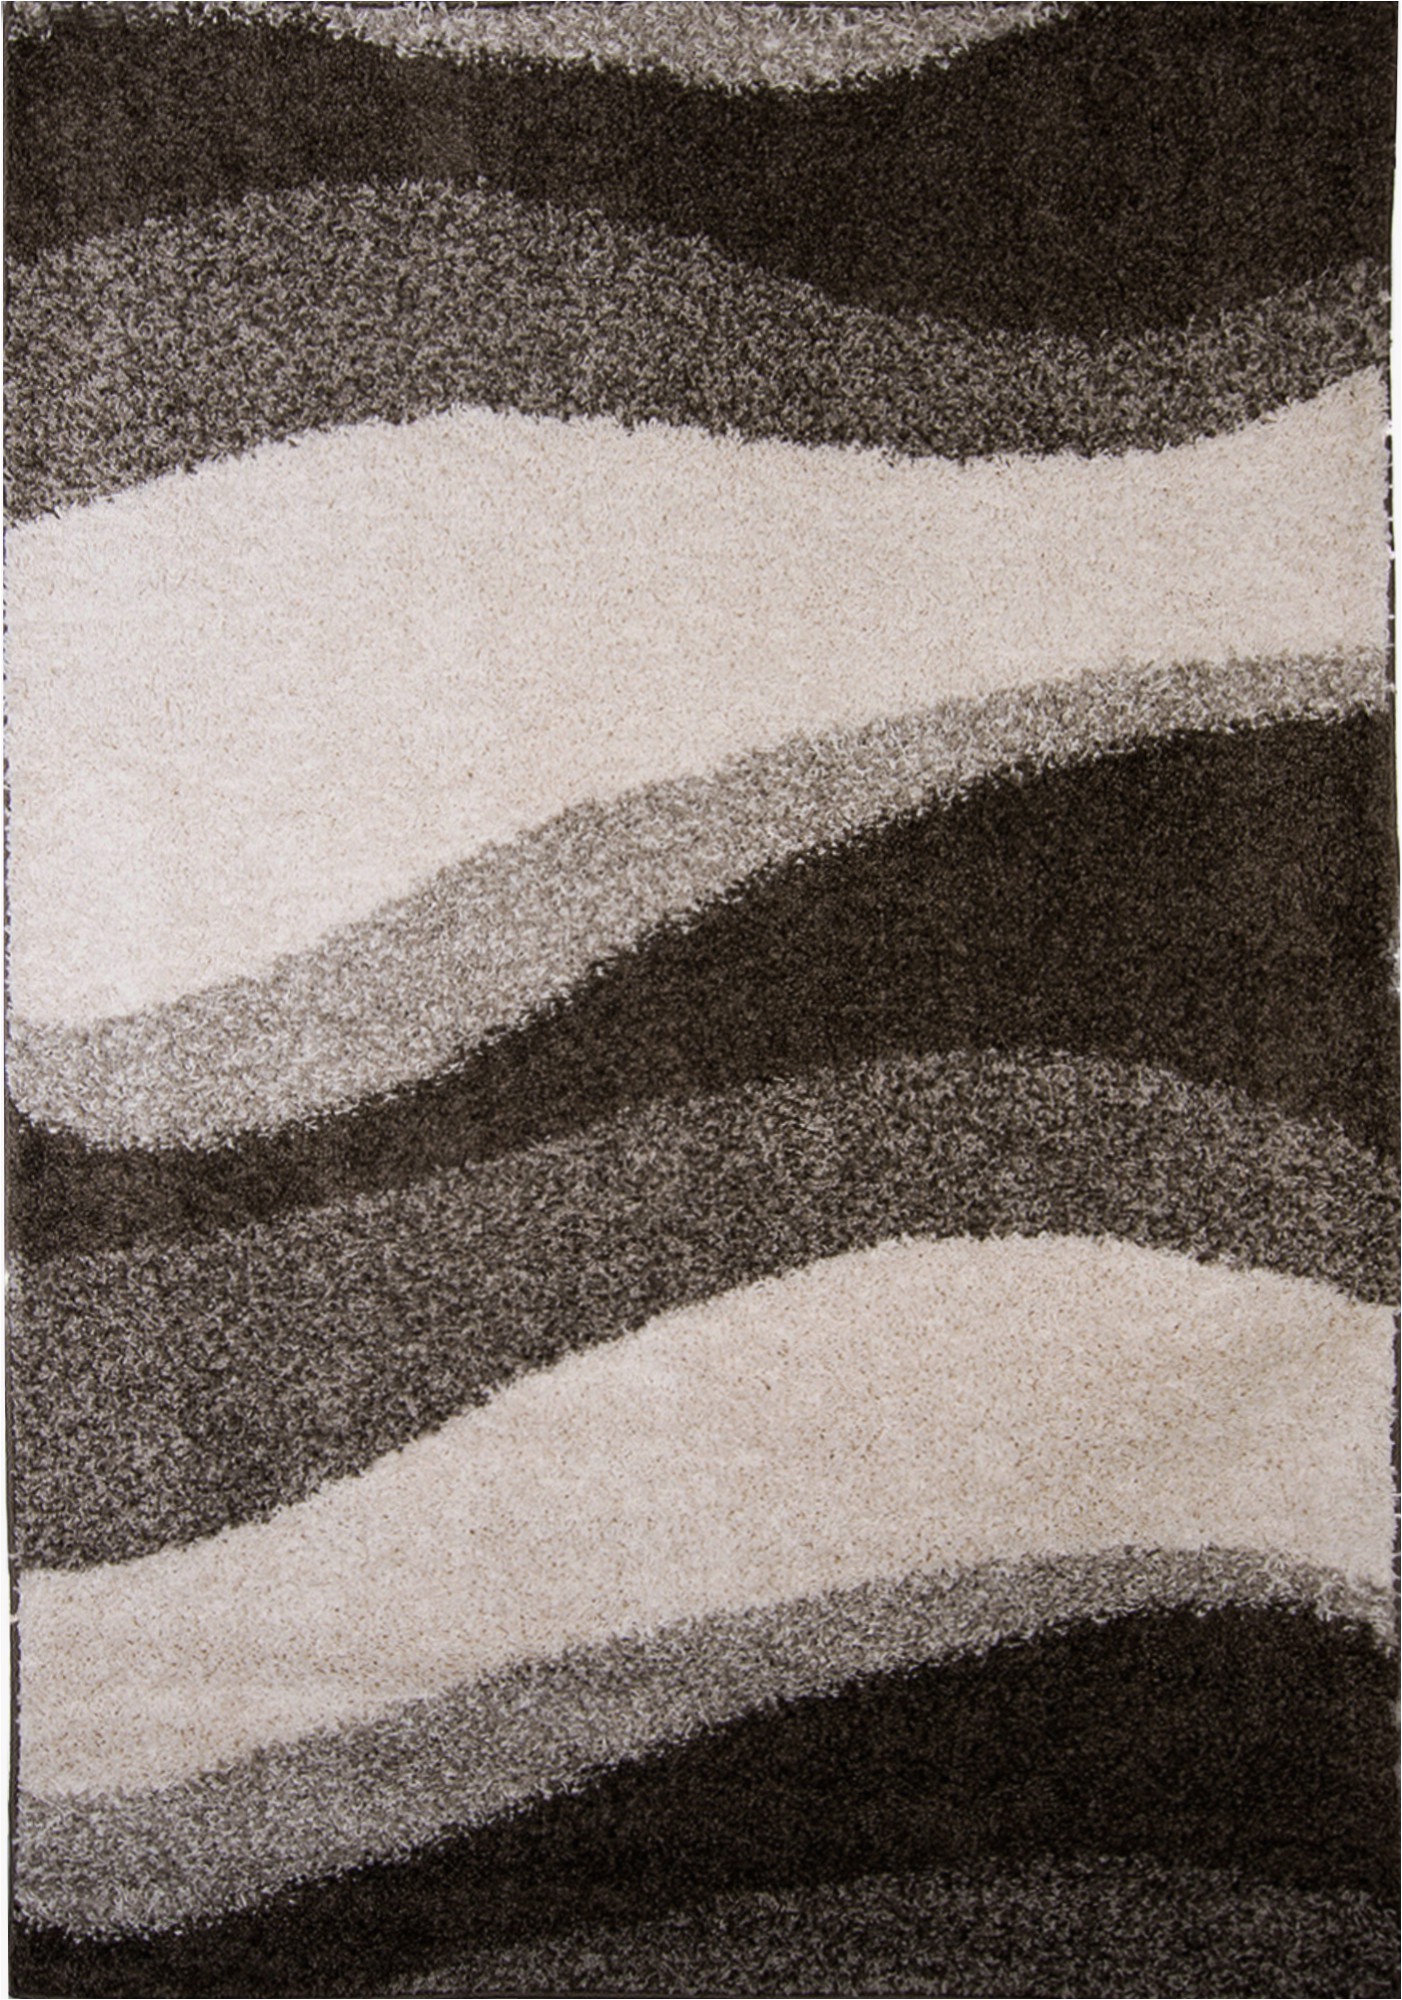 Nicole Miller Synergy area Rug Details About Nicole Miller Designer 5×7 area Rug Gray White Waves Rug Actual 5 2" X 7 2"